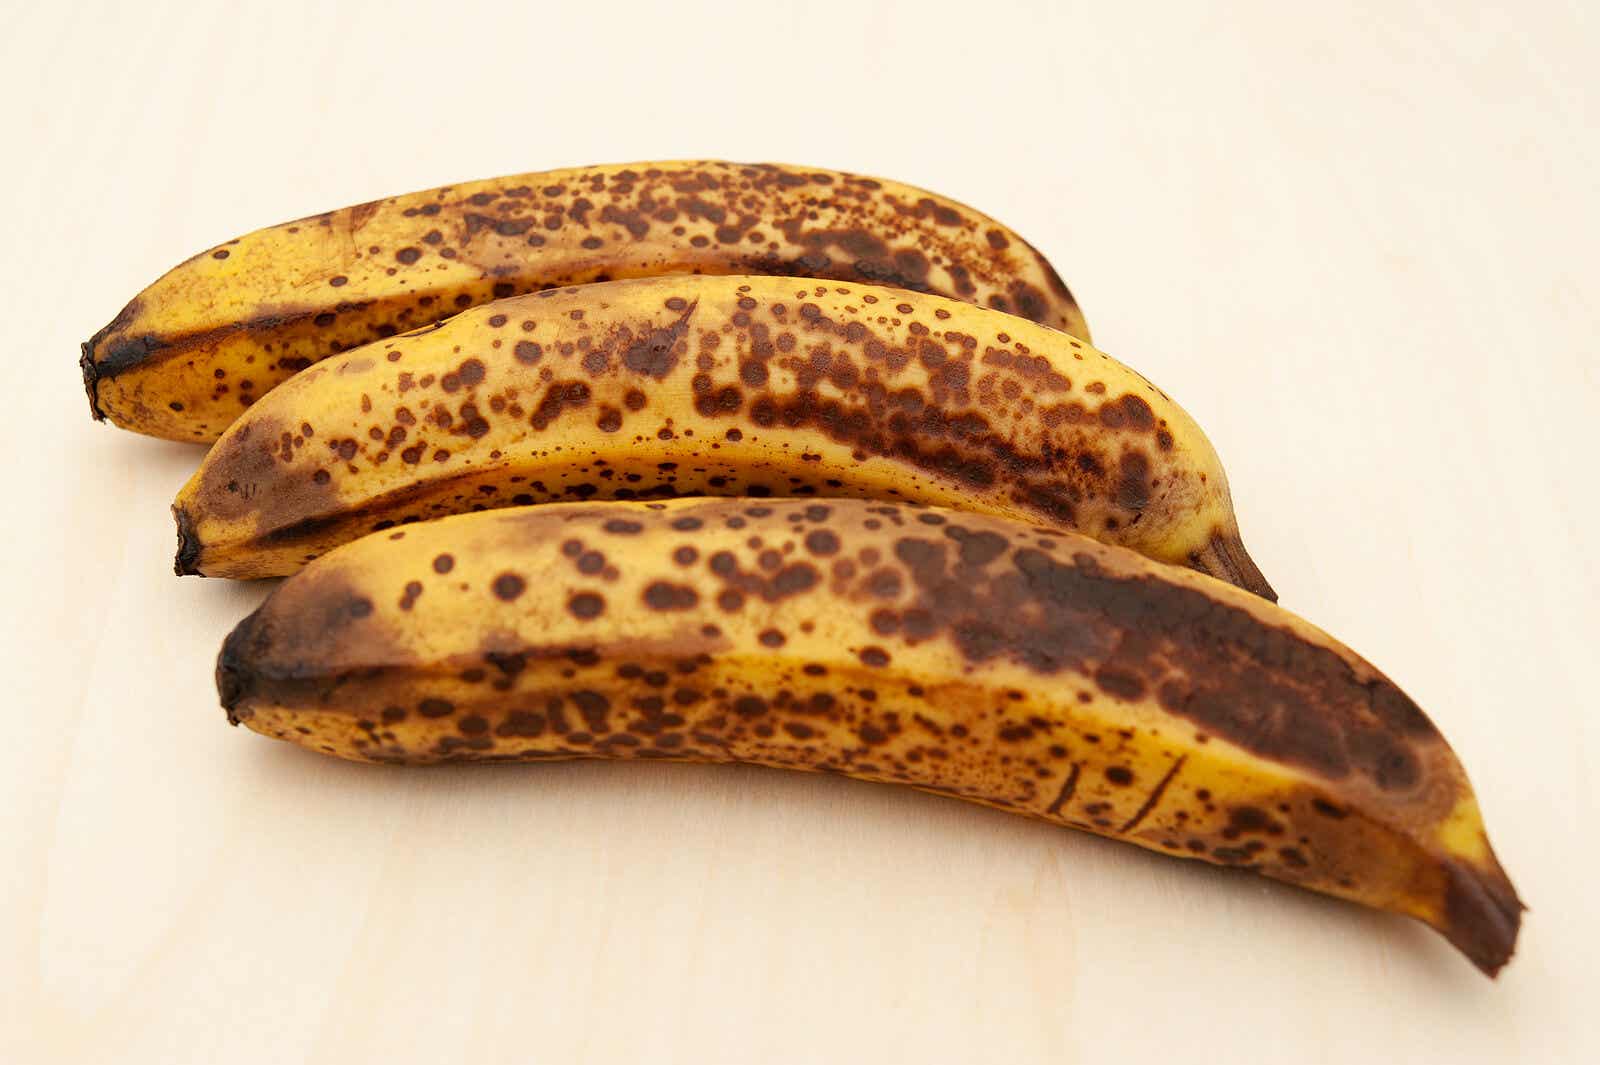 Ripe Bananas Are Fruits You Can't Eat on a Keto Diet